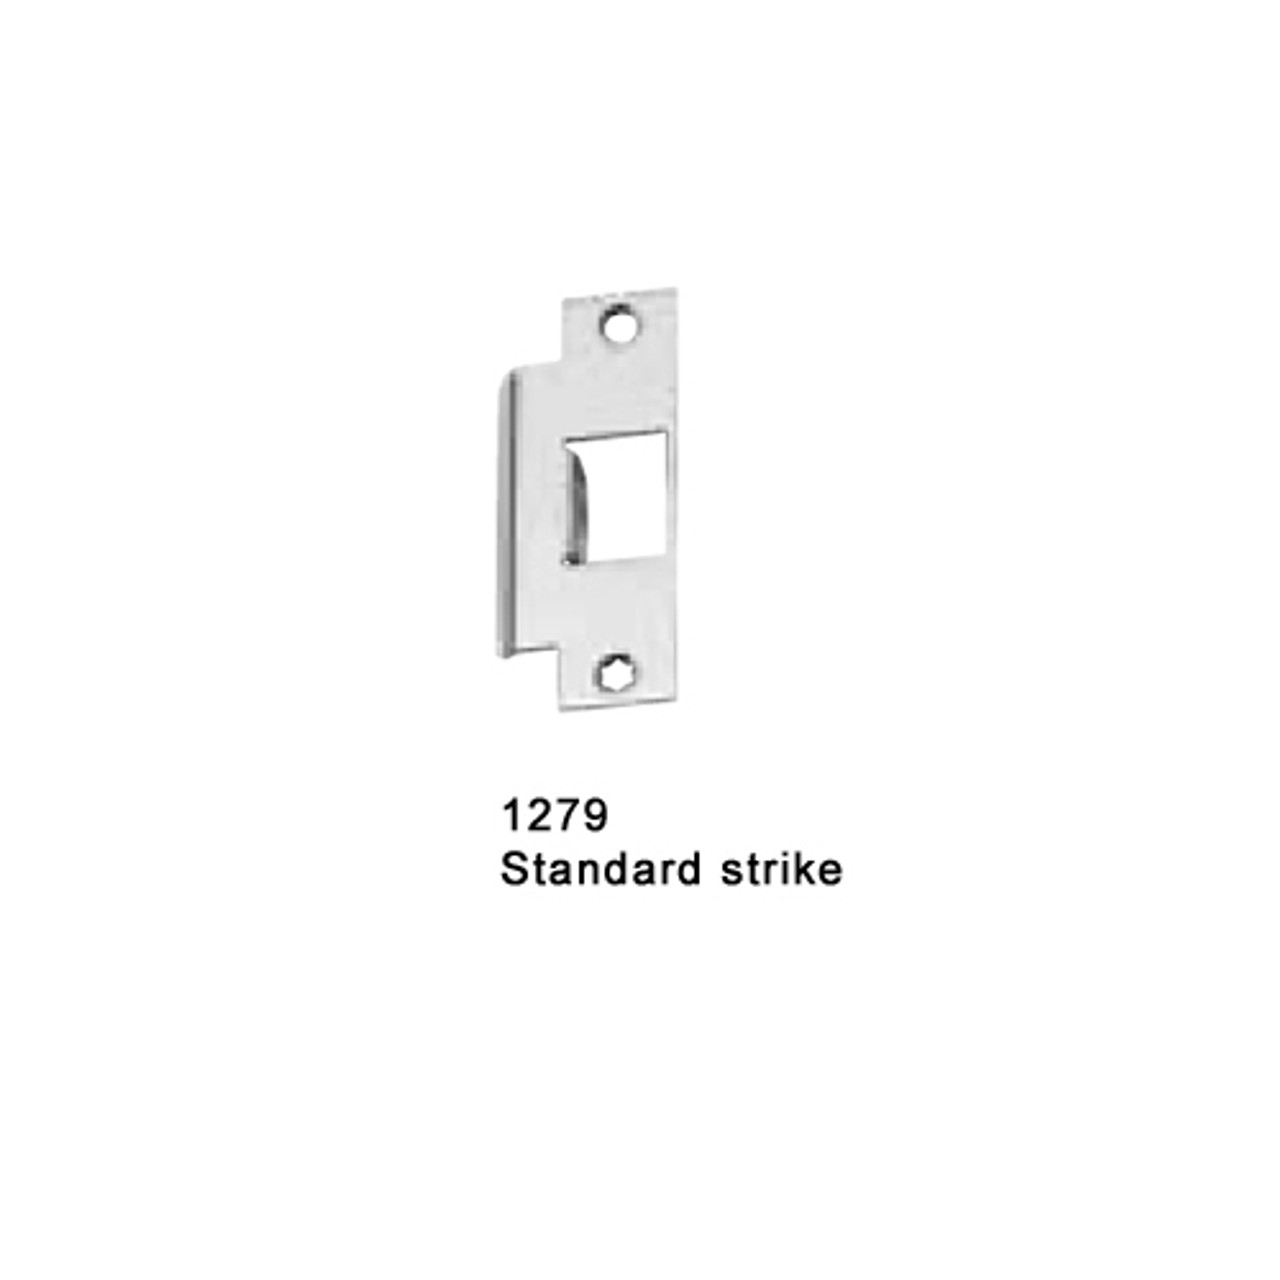 F-25-M-L-Dane-US3-3-LHR Falcon 25 Series Fire Rated Mortise Lock Devices with 510L Dane Lever Trim in Polished Brass